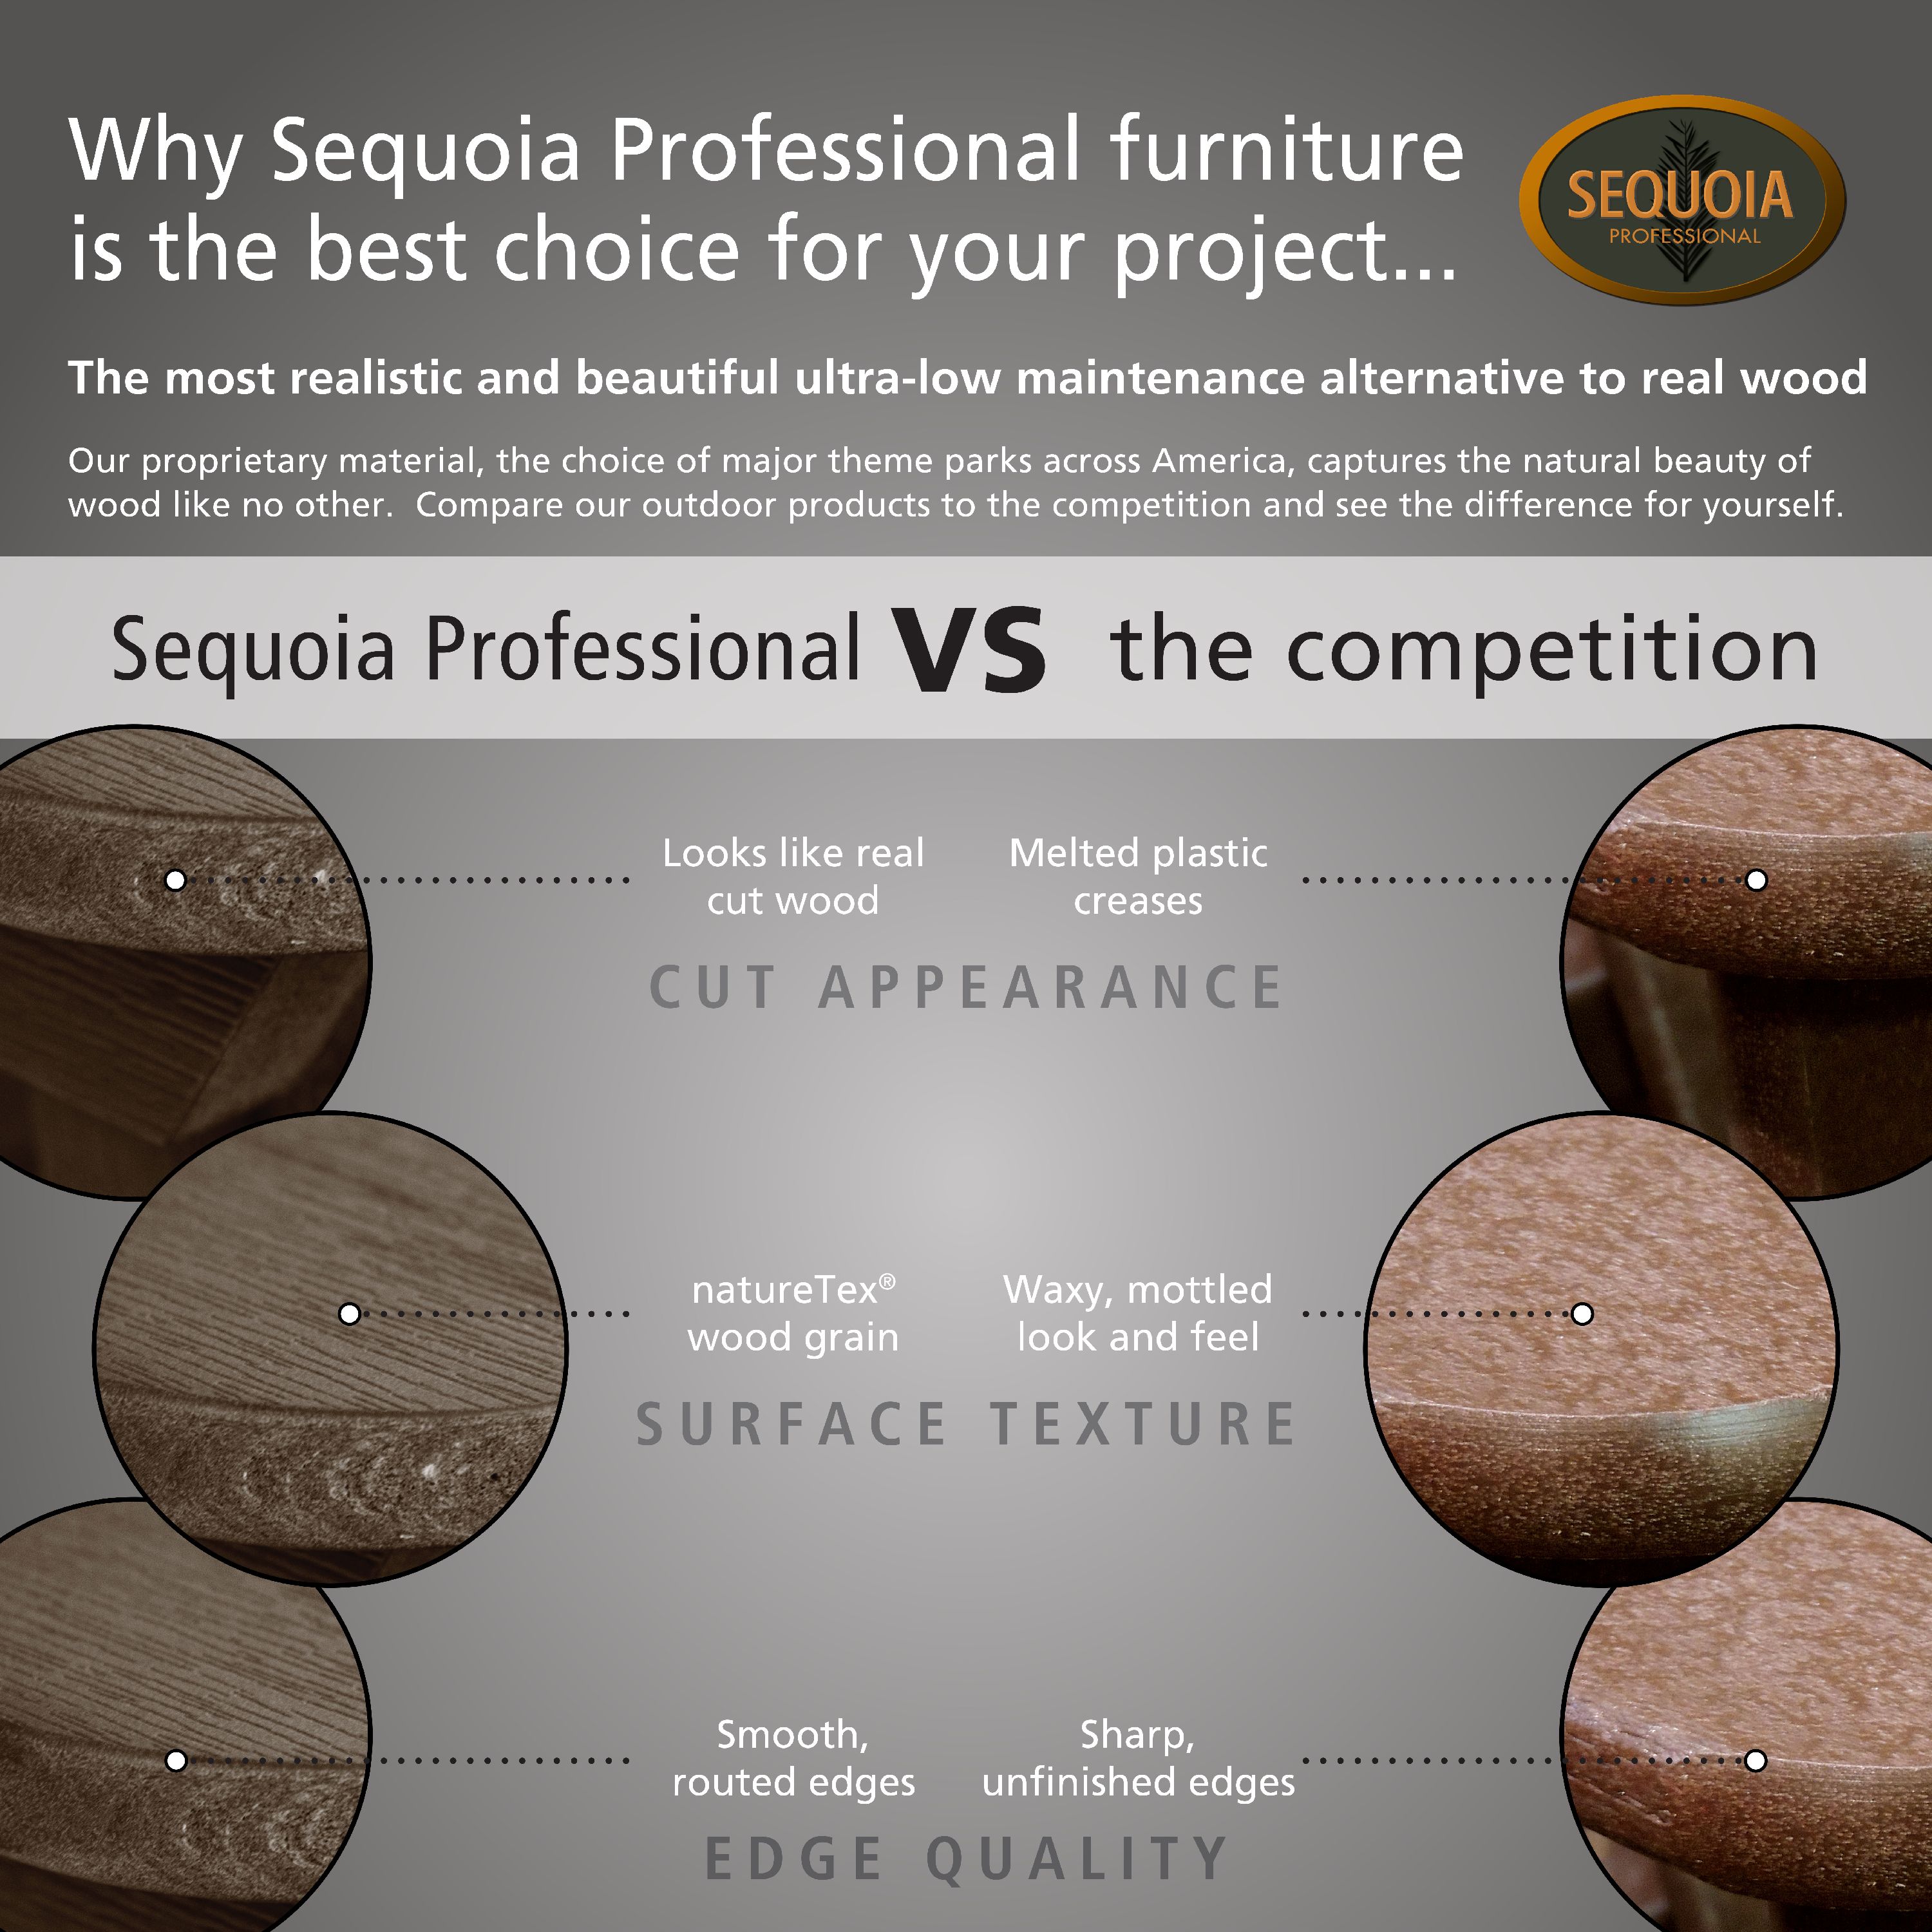 The Sequoia Professional Commercial Grade Springville Lounge Chair - image 2 of 2